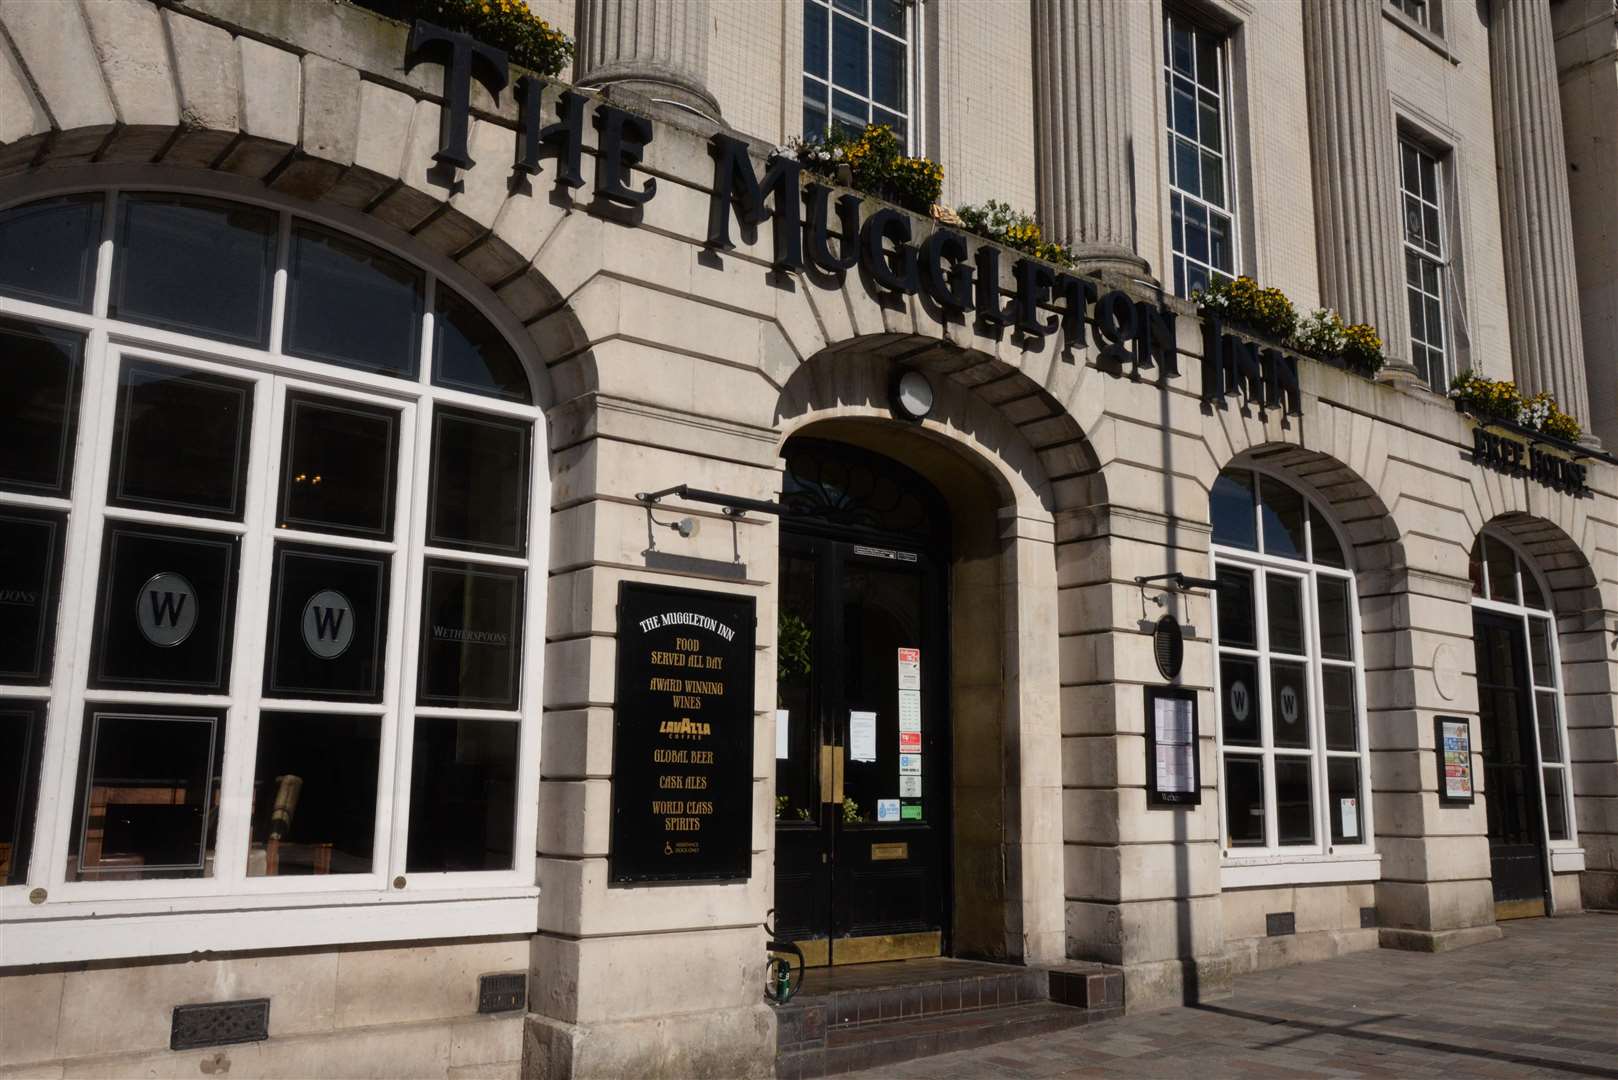 The Muggleton Inn opened in 1995. In takes its name from Charles Dickens’ novel the Pickwick Papers in which Maidstone is called ‘Muggleton’ and its residents ‘Muggletonians’